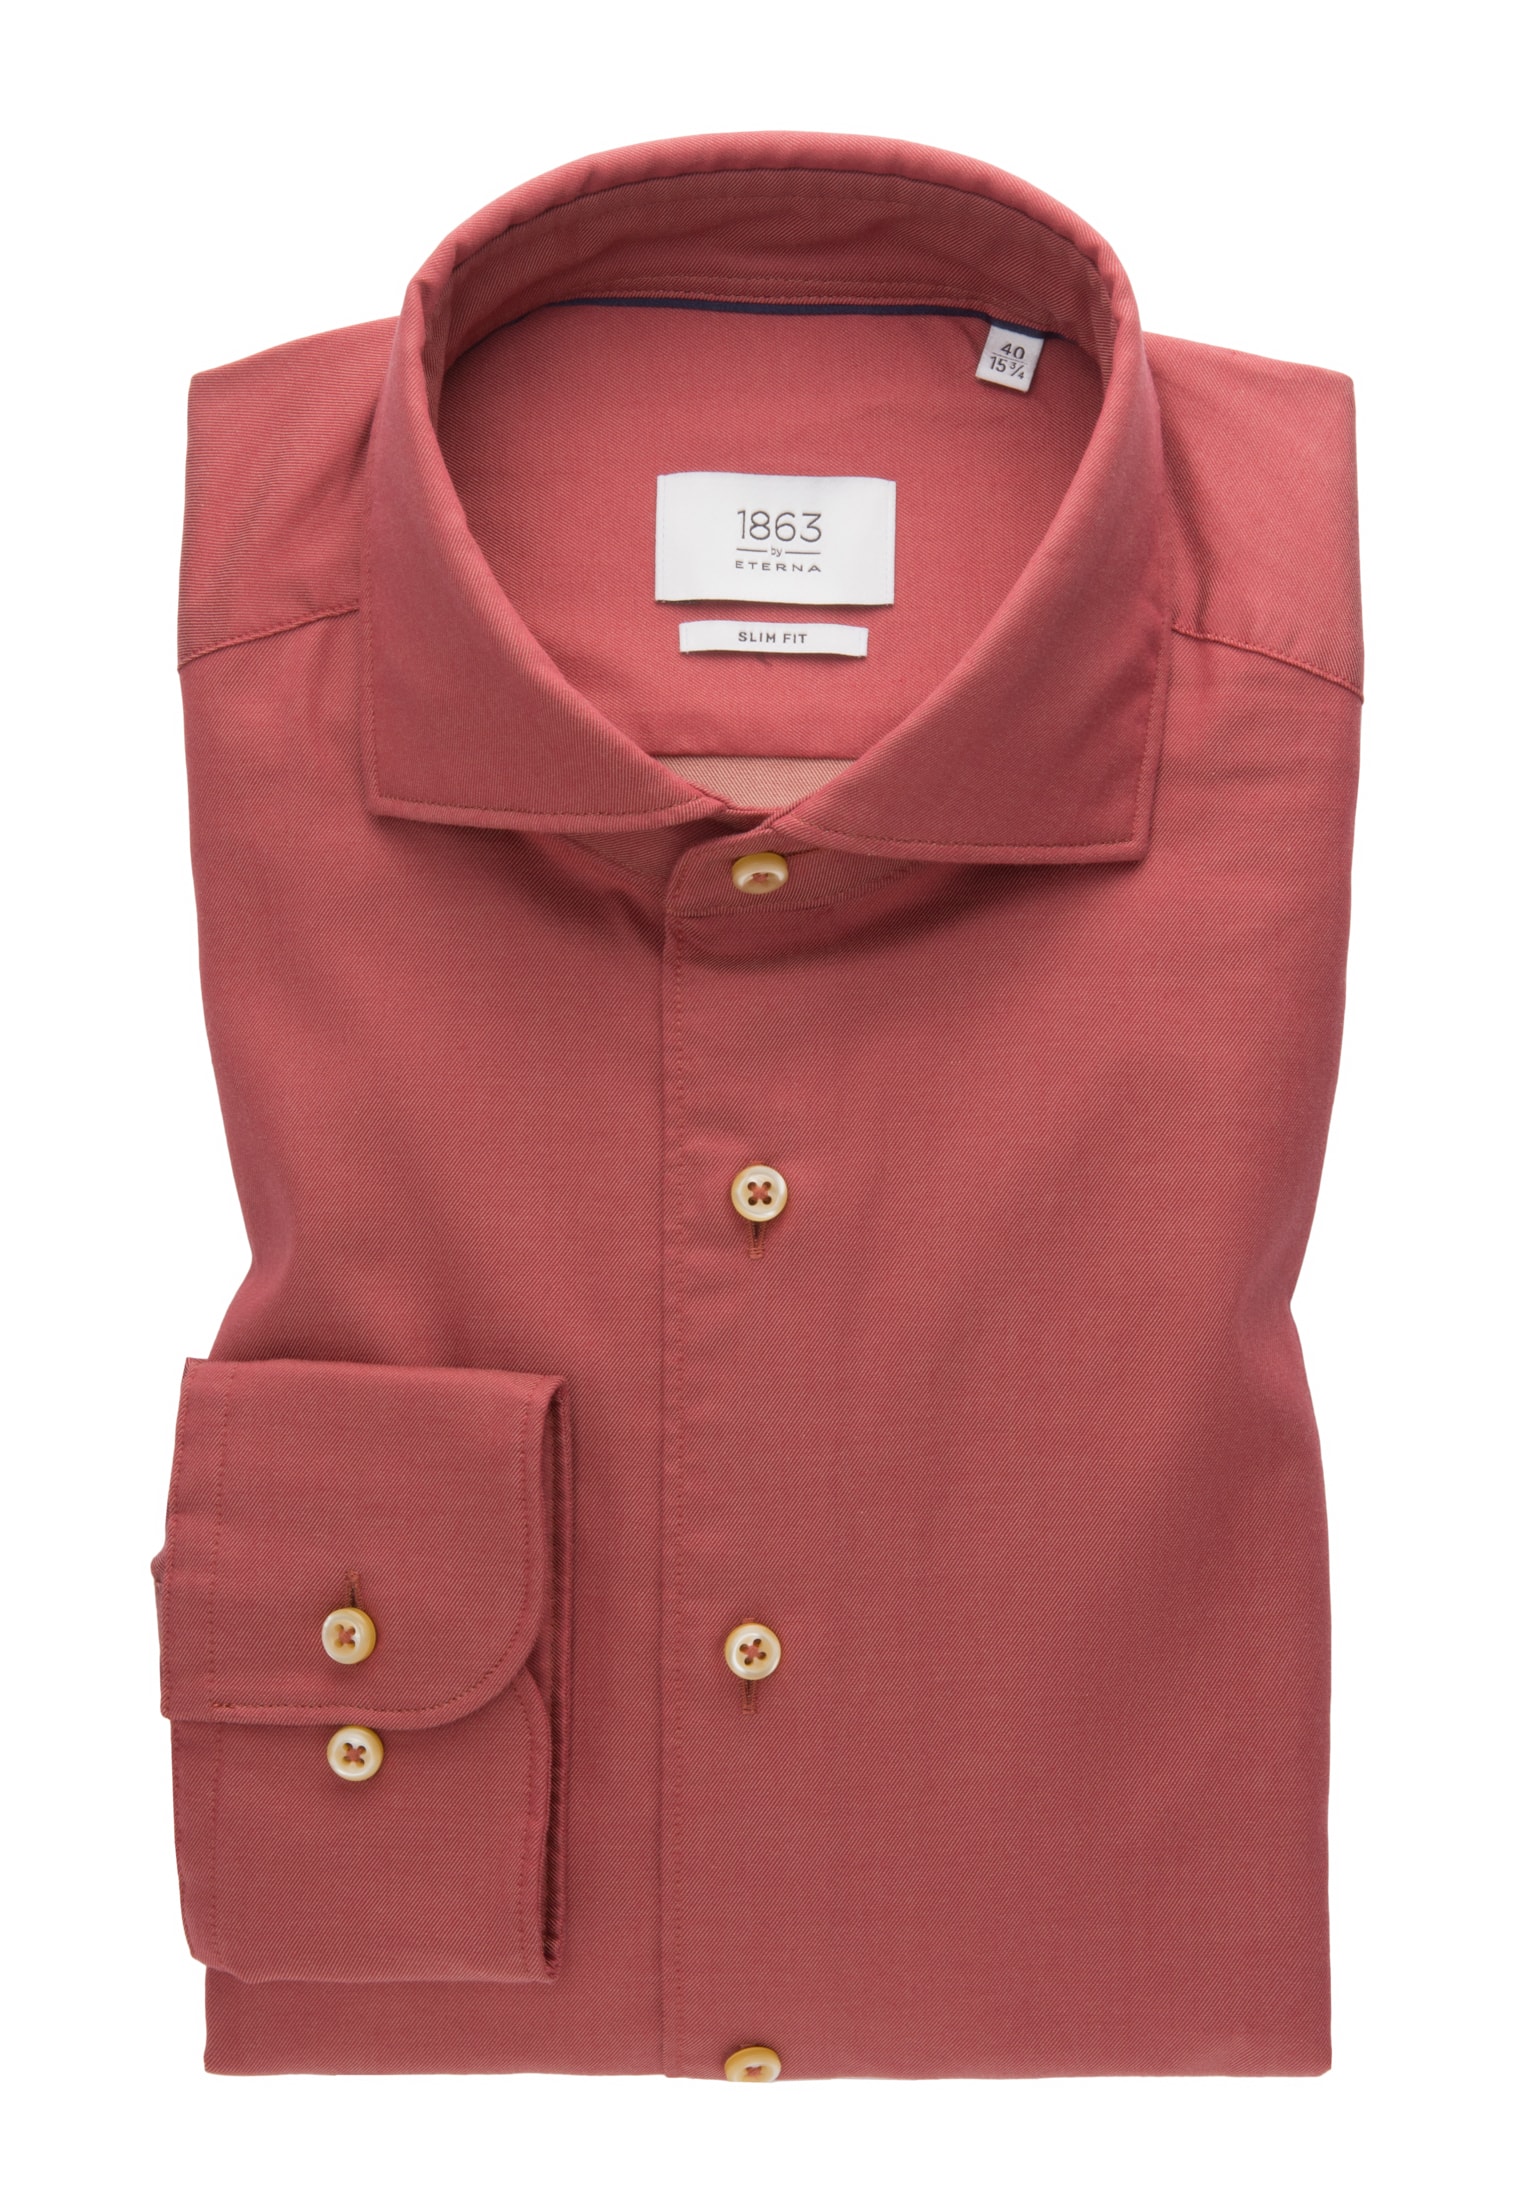 SLIM FIT Soft Luxury Shirt in sunset red plain